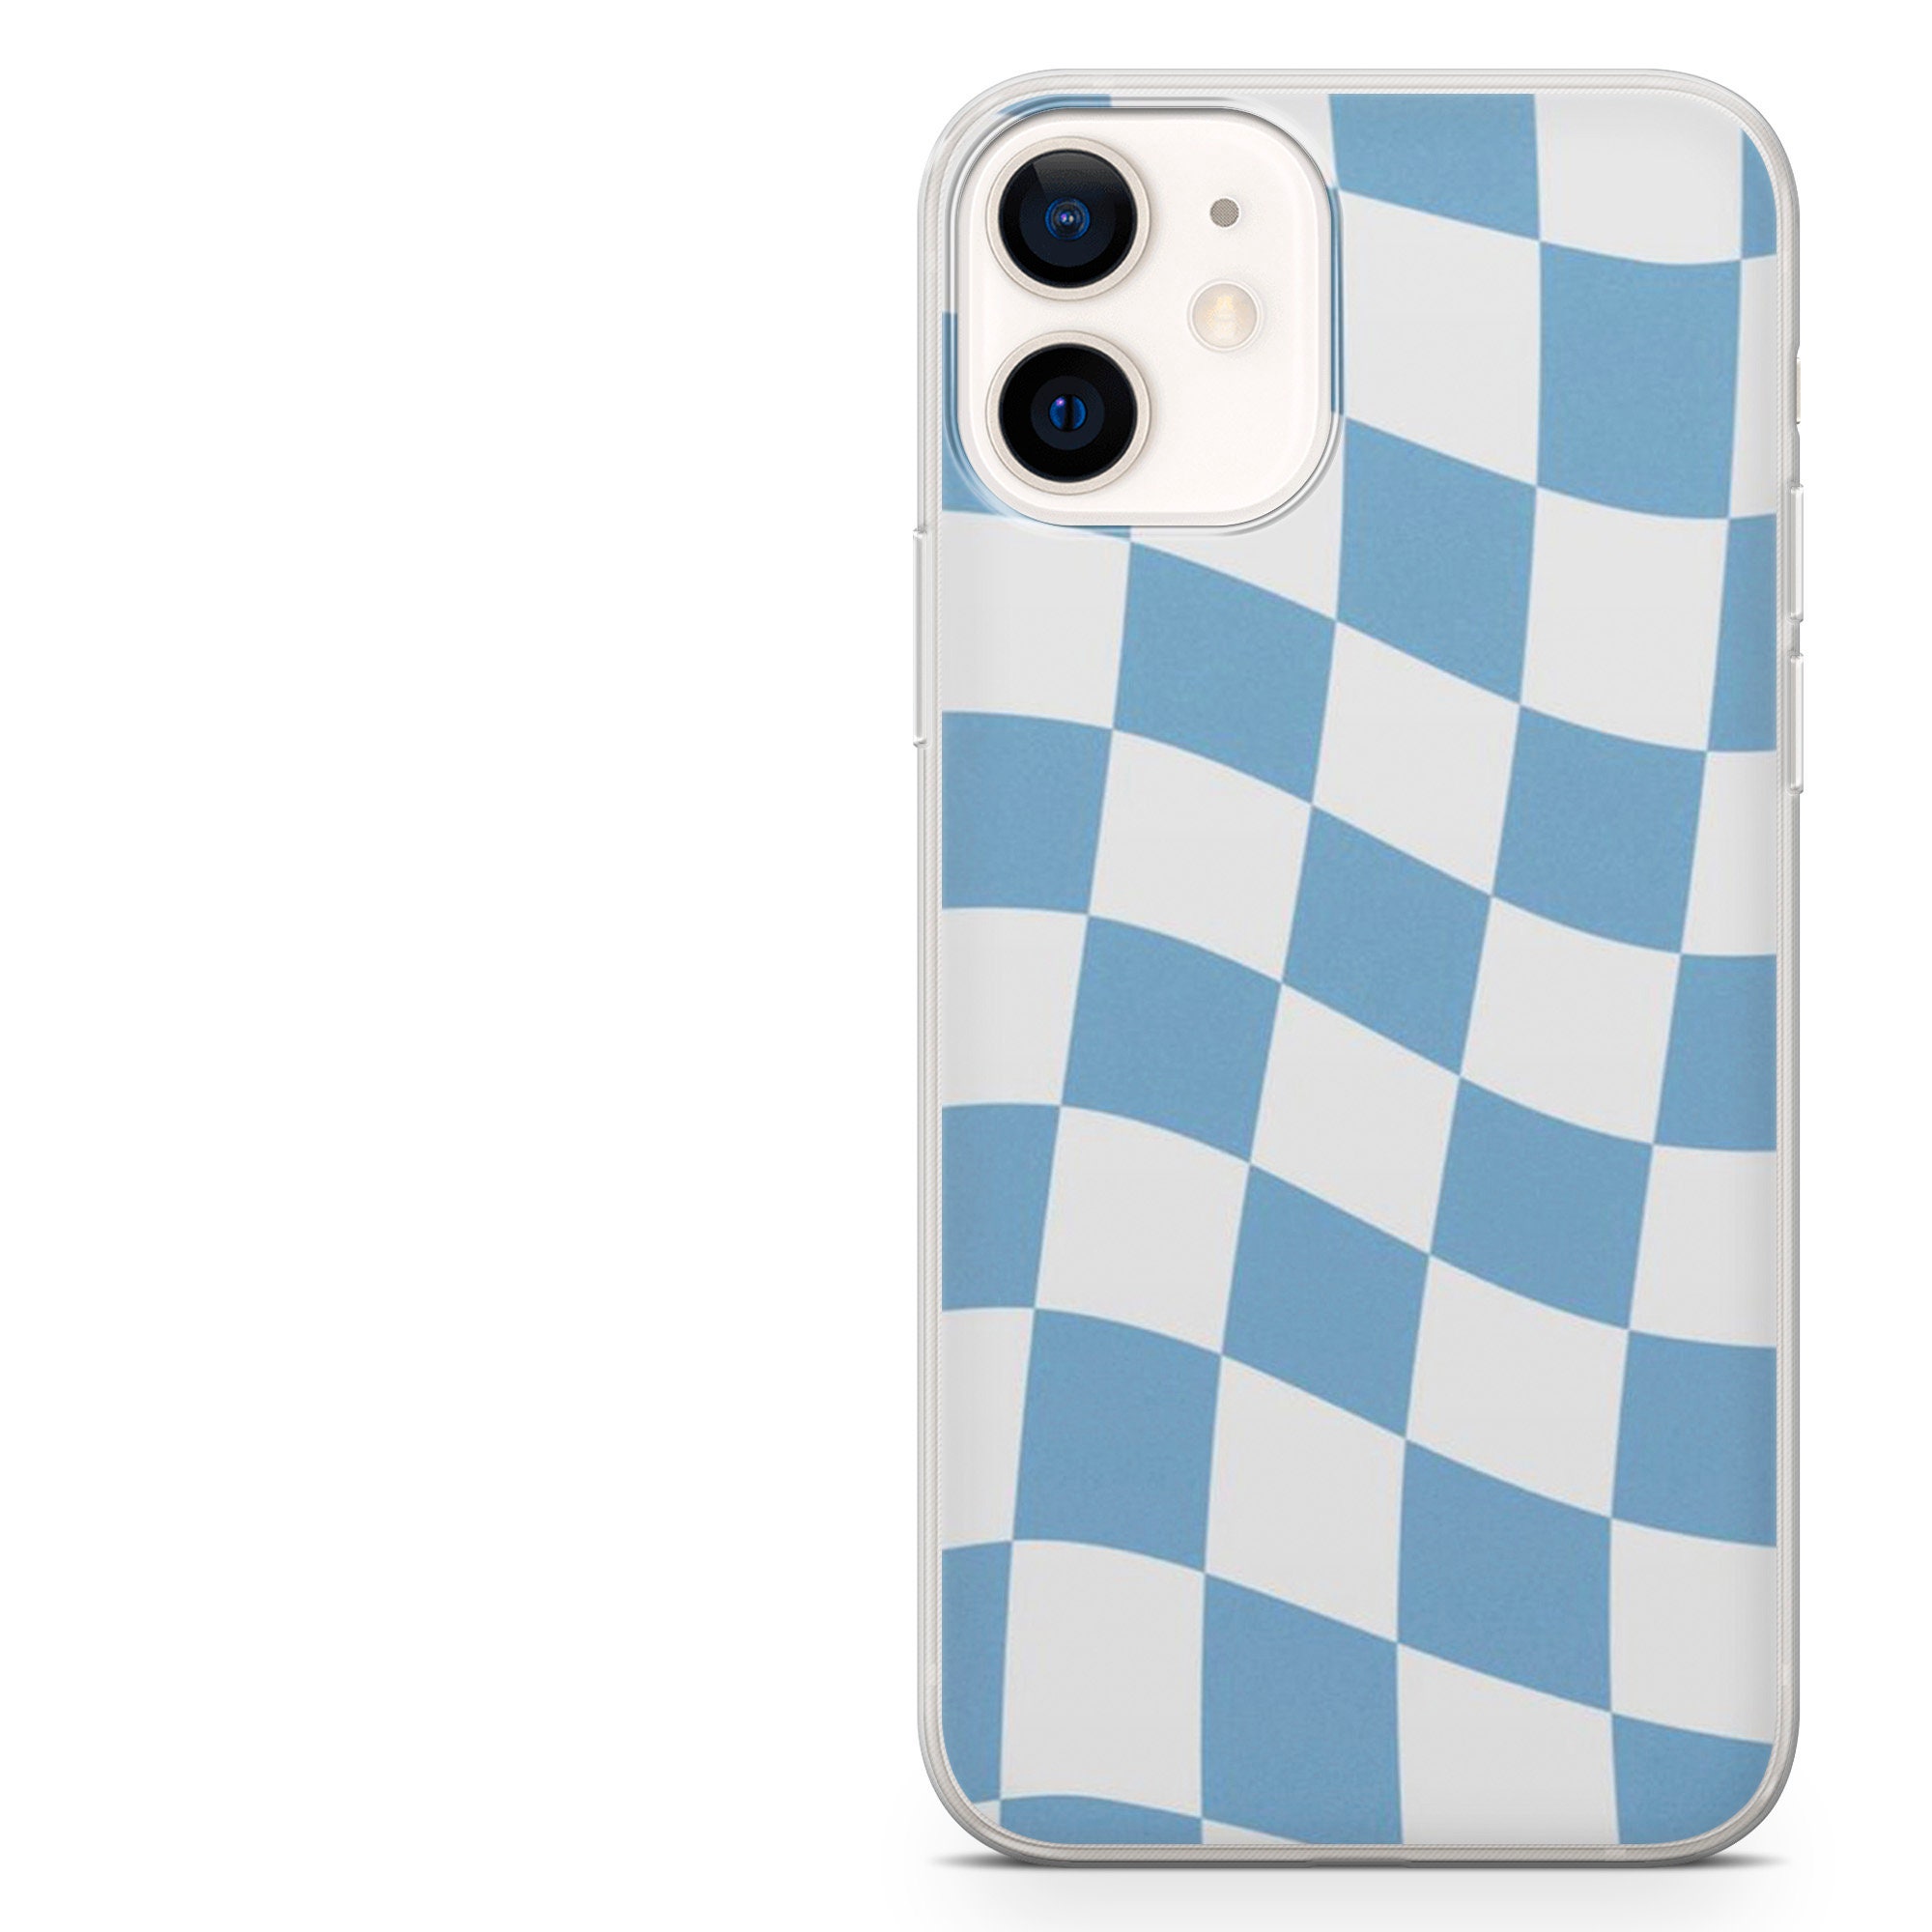 Checkered Phone Case Black and White Checkerboard Case Fits